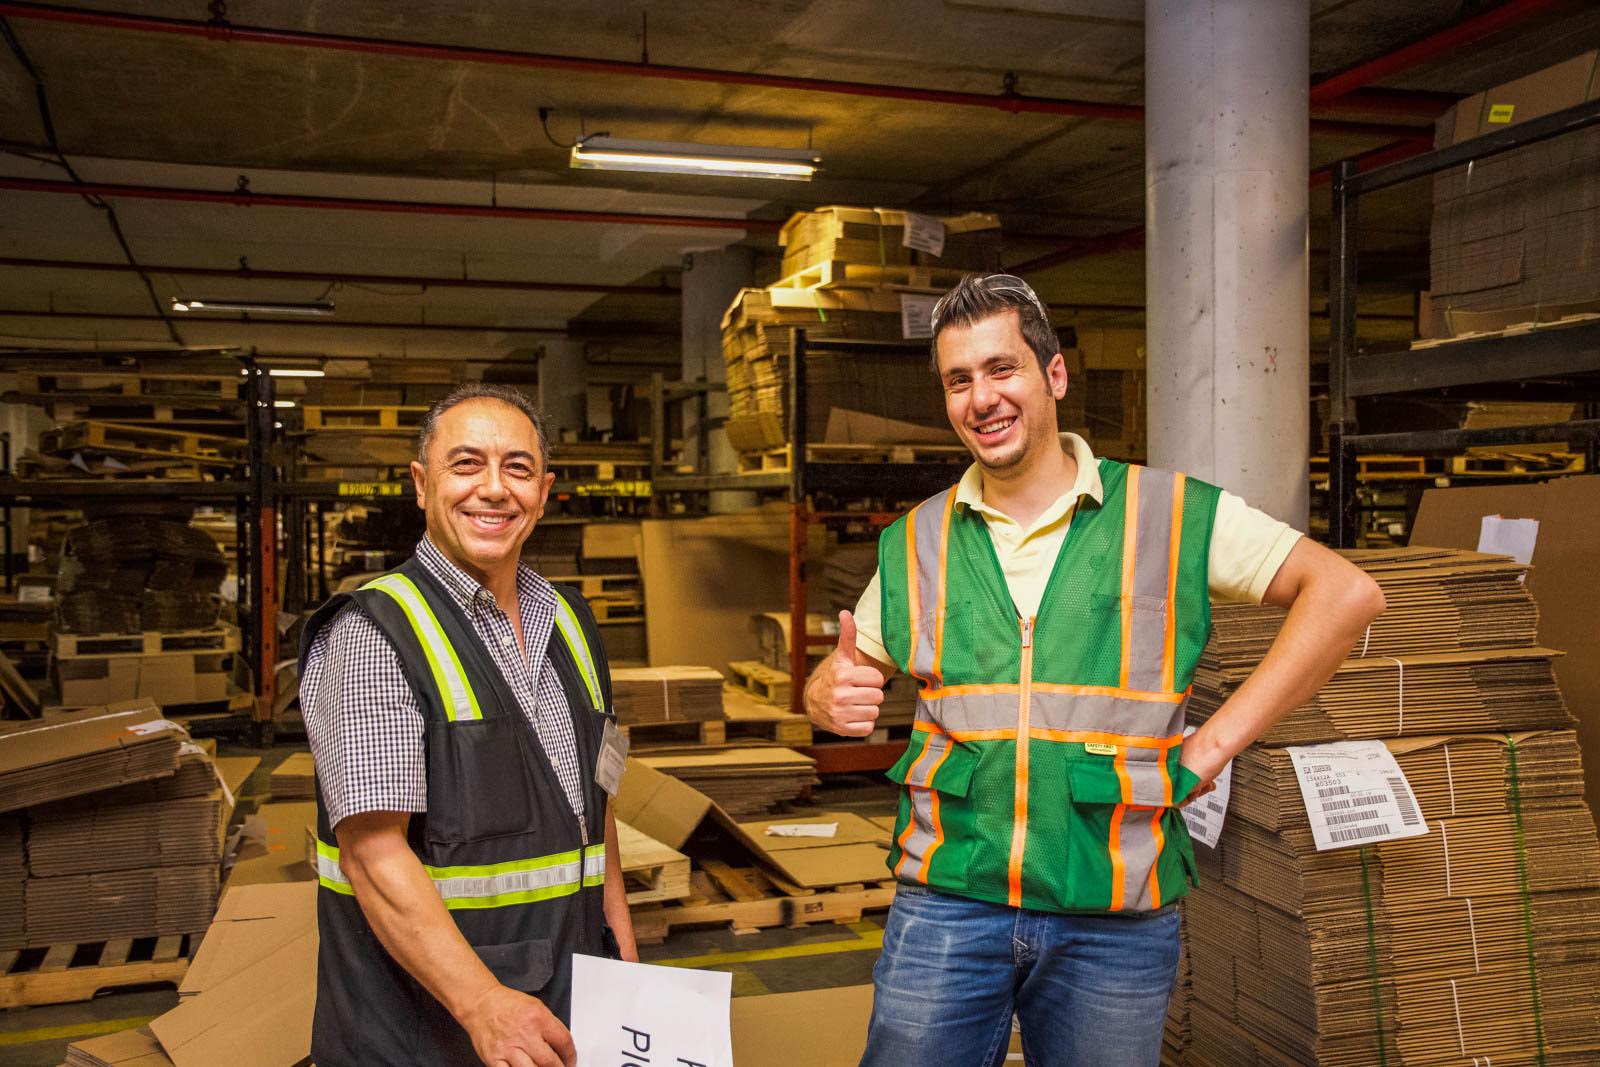 Smiling warehouse employees give a thumbs up